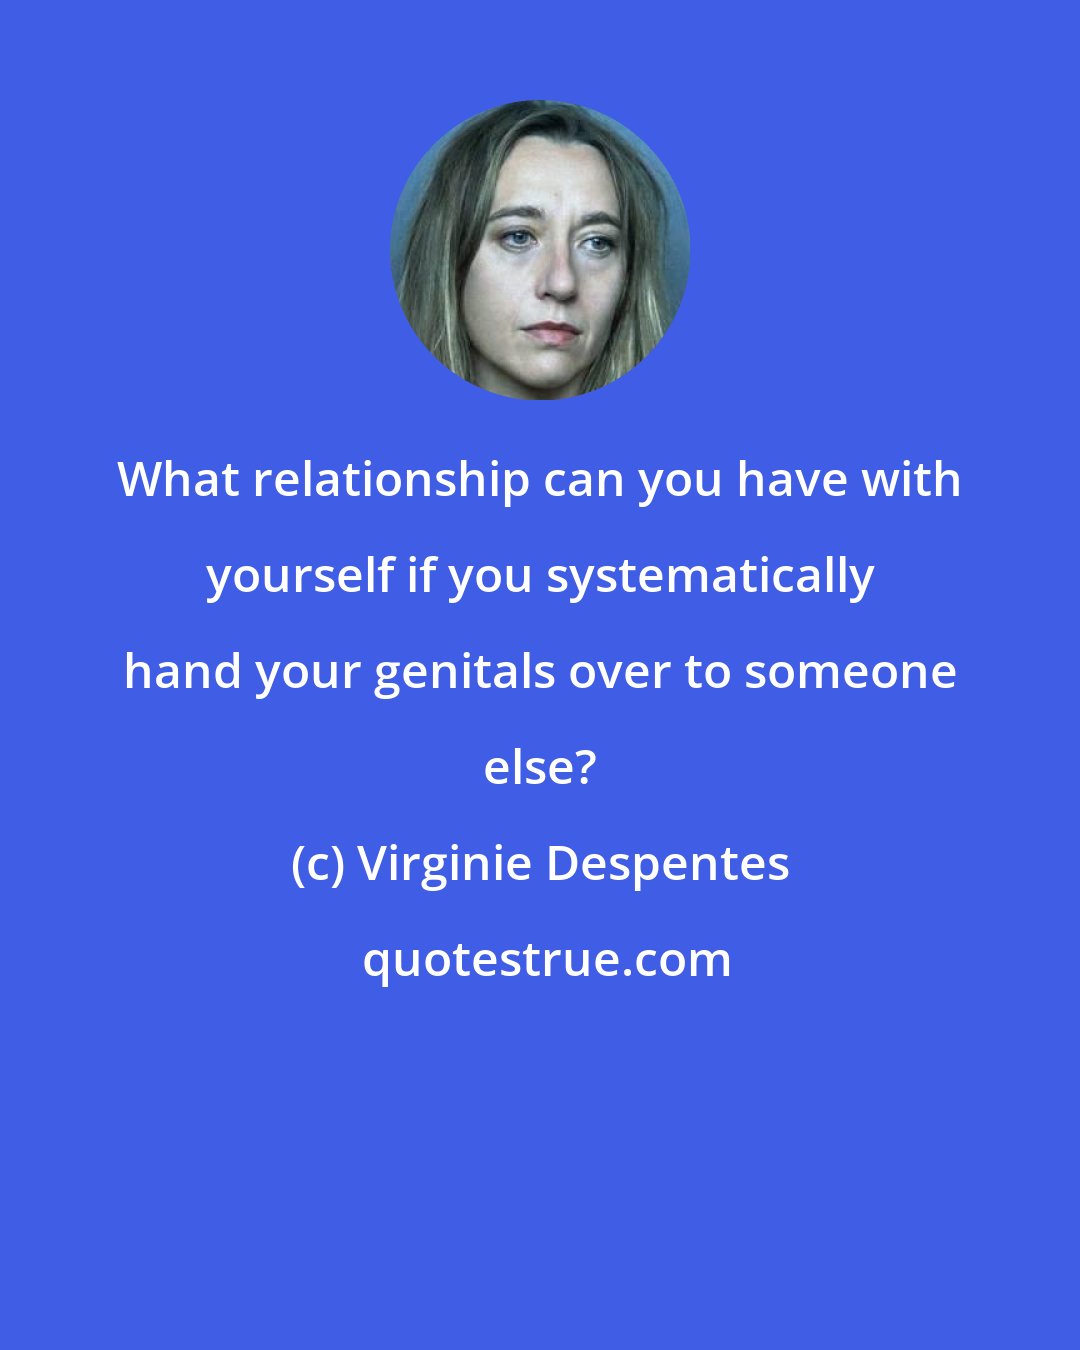 Virginie Despentes: What relationship can you have with yourself if you systematically hand your genitals over to someone else?